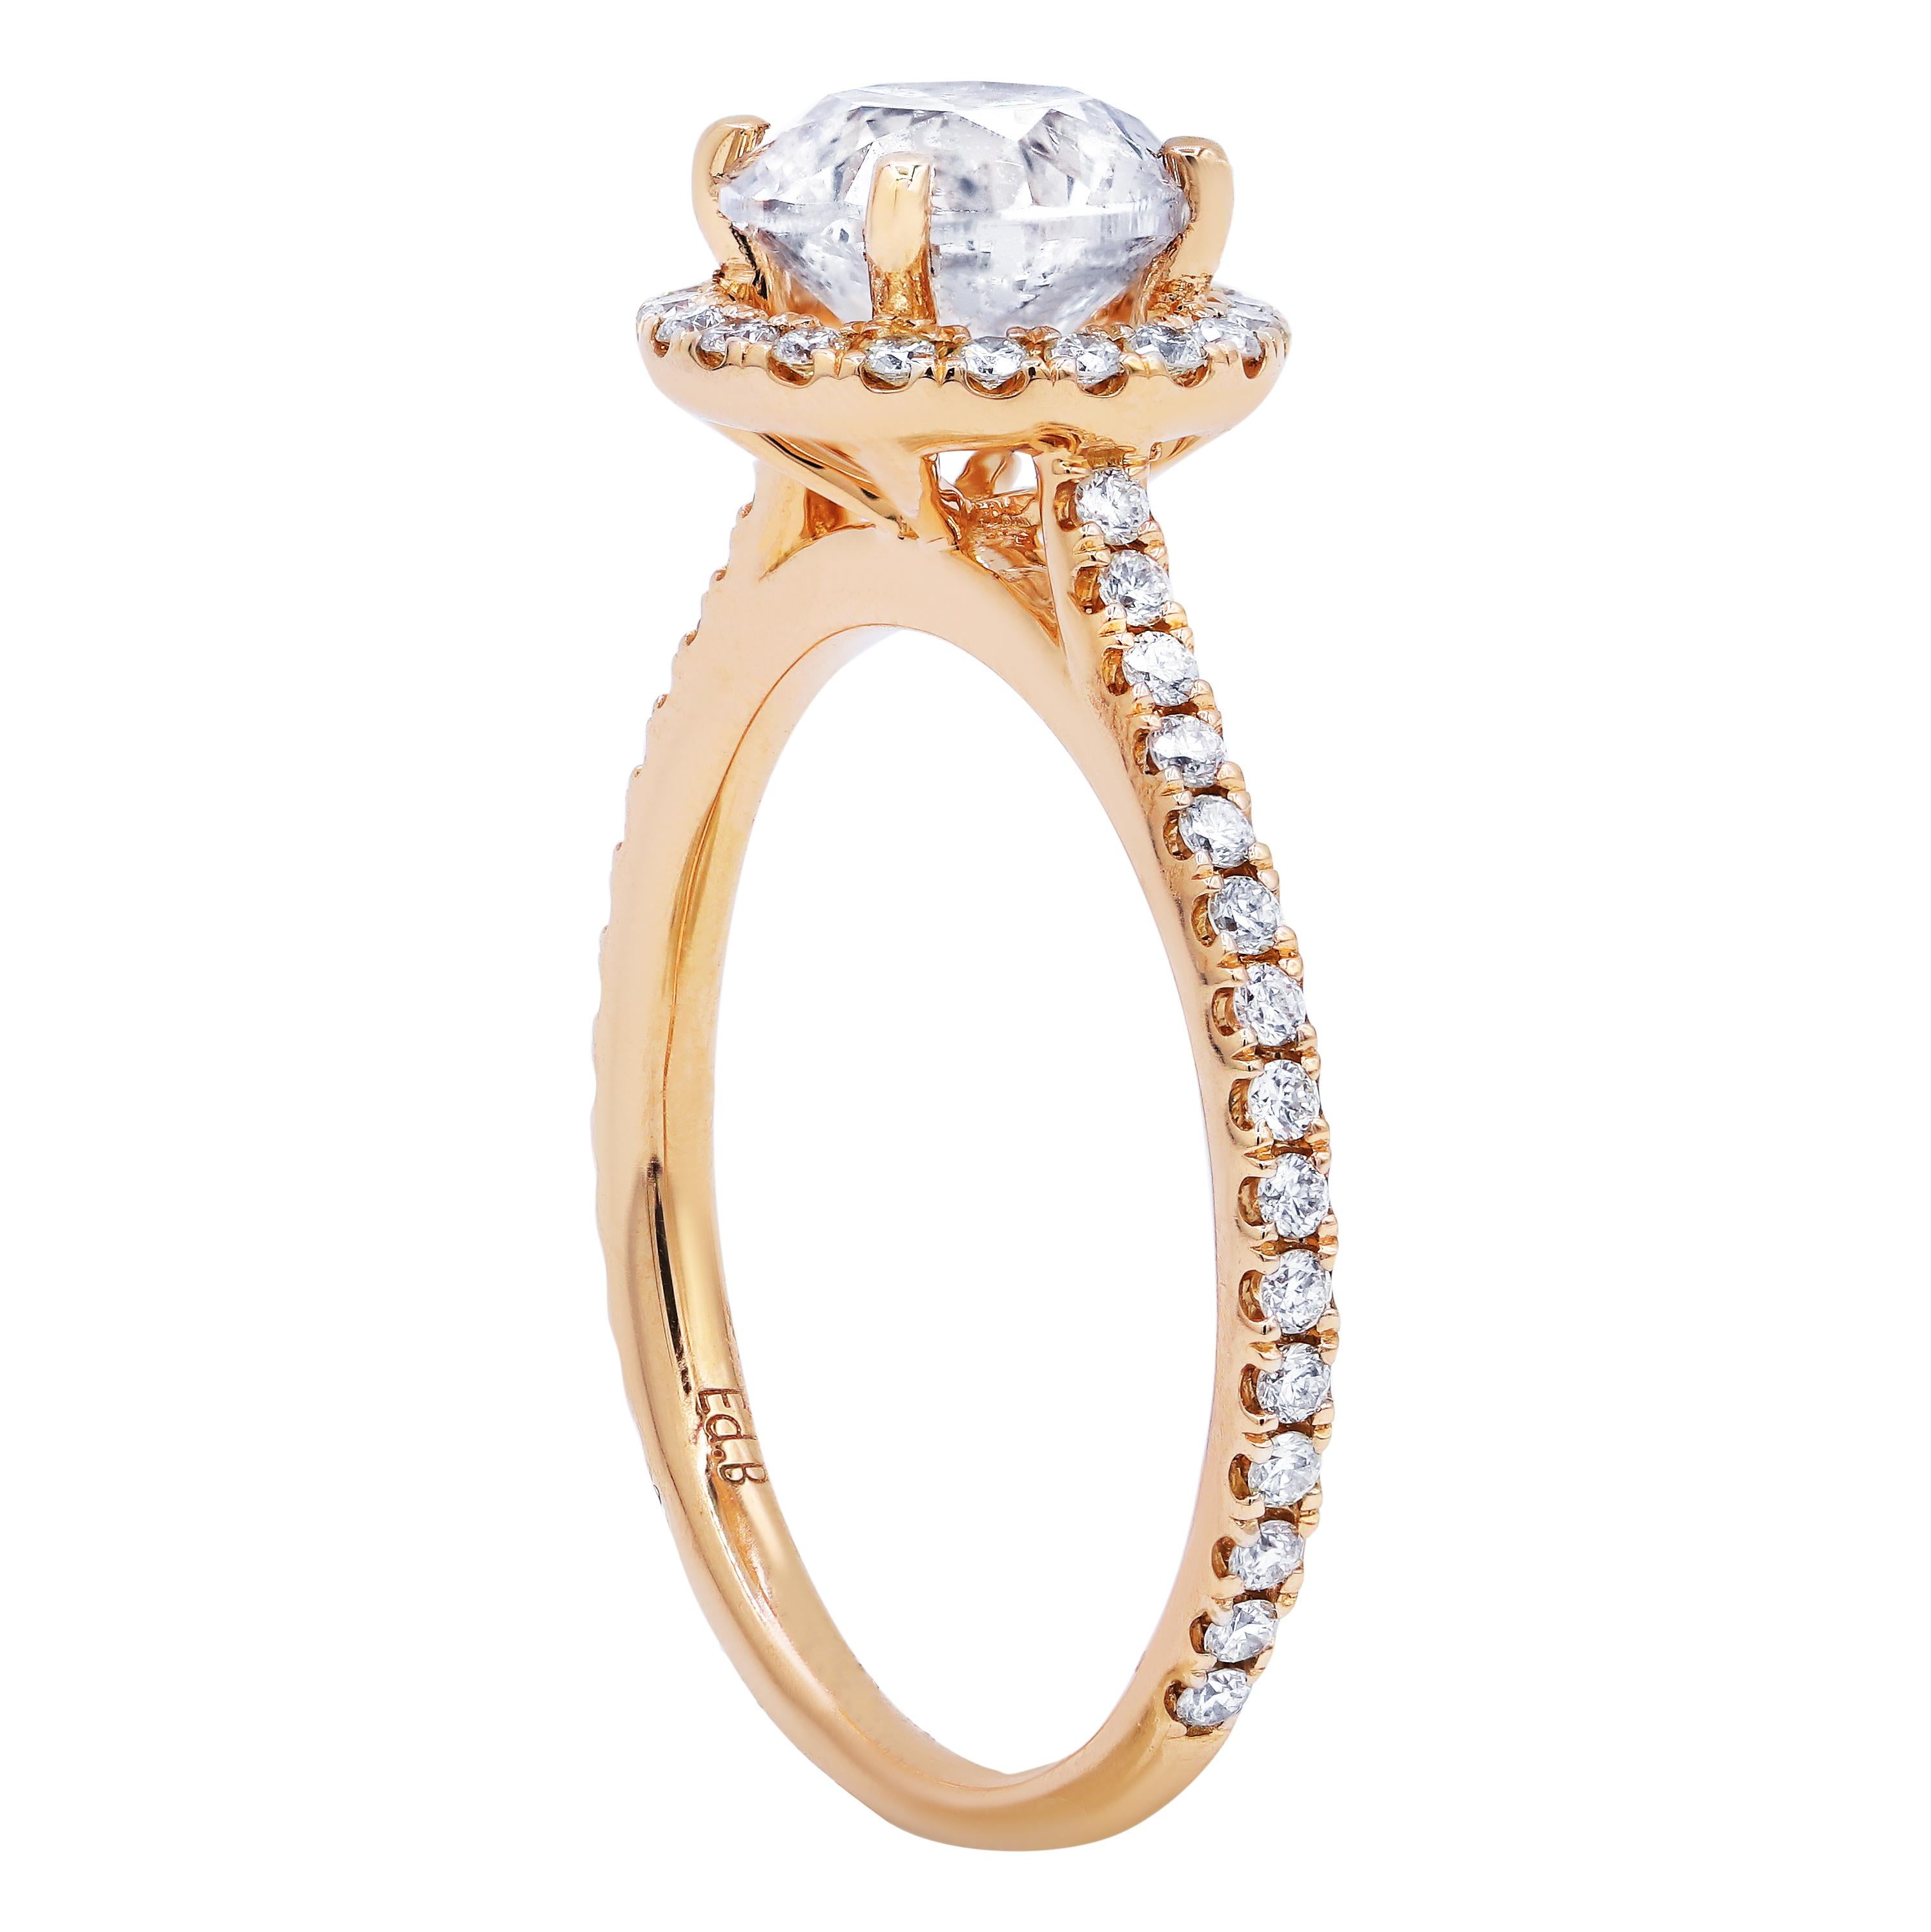 18 karat rose gold halo diamond engagement ring features 1.55 carat clarity enhanced round cut diamond set with additional 0.38 cts round diamonds on the side.
